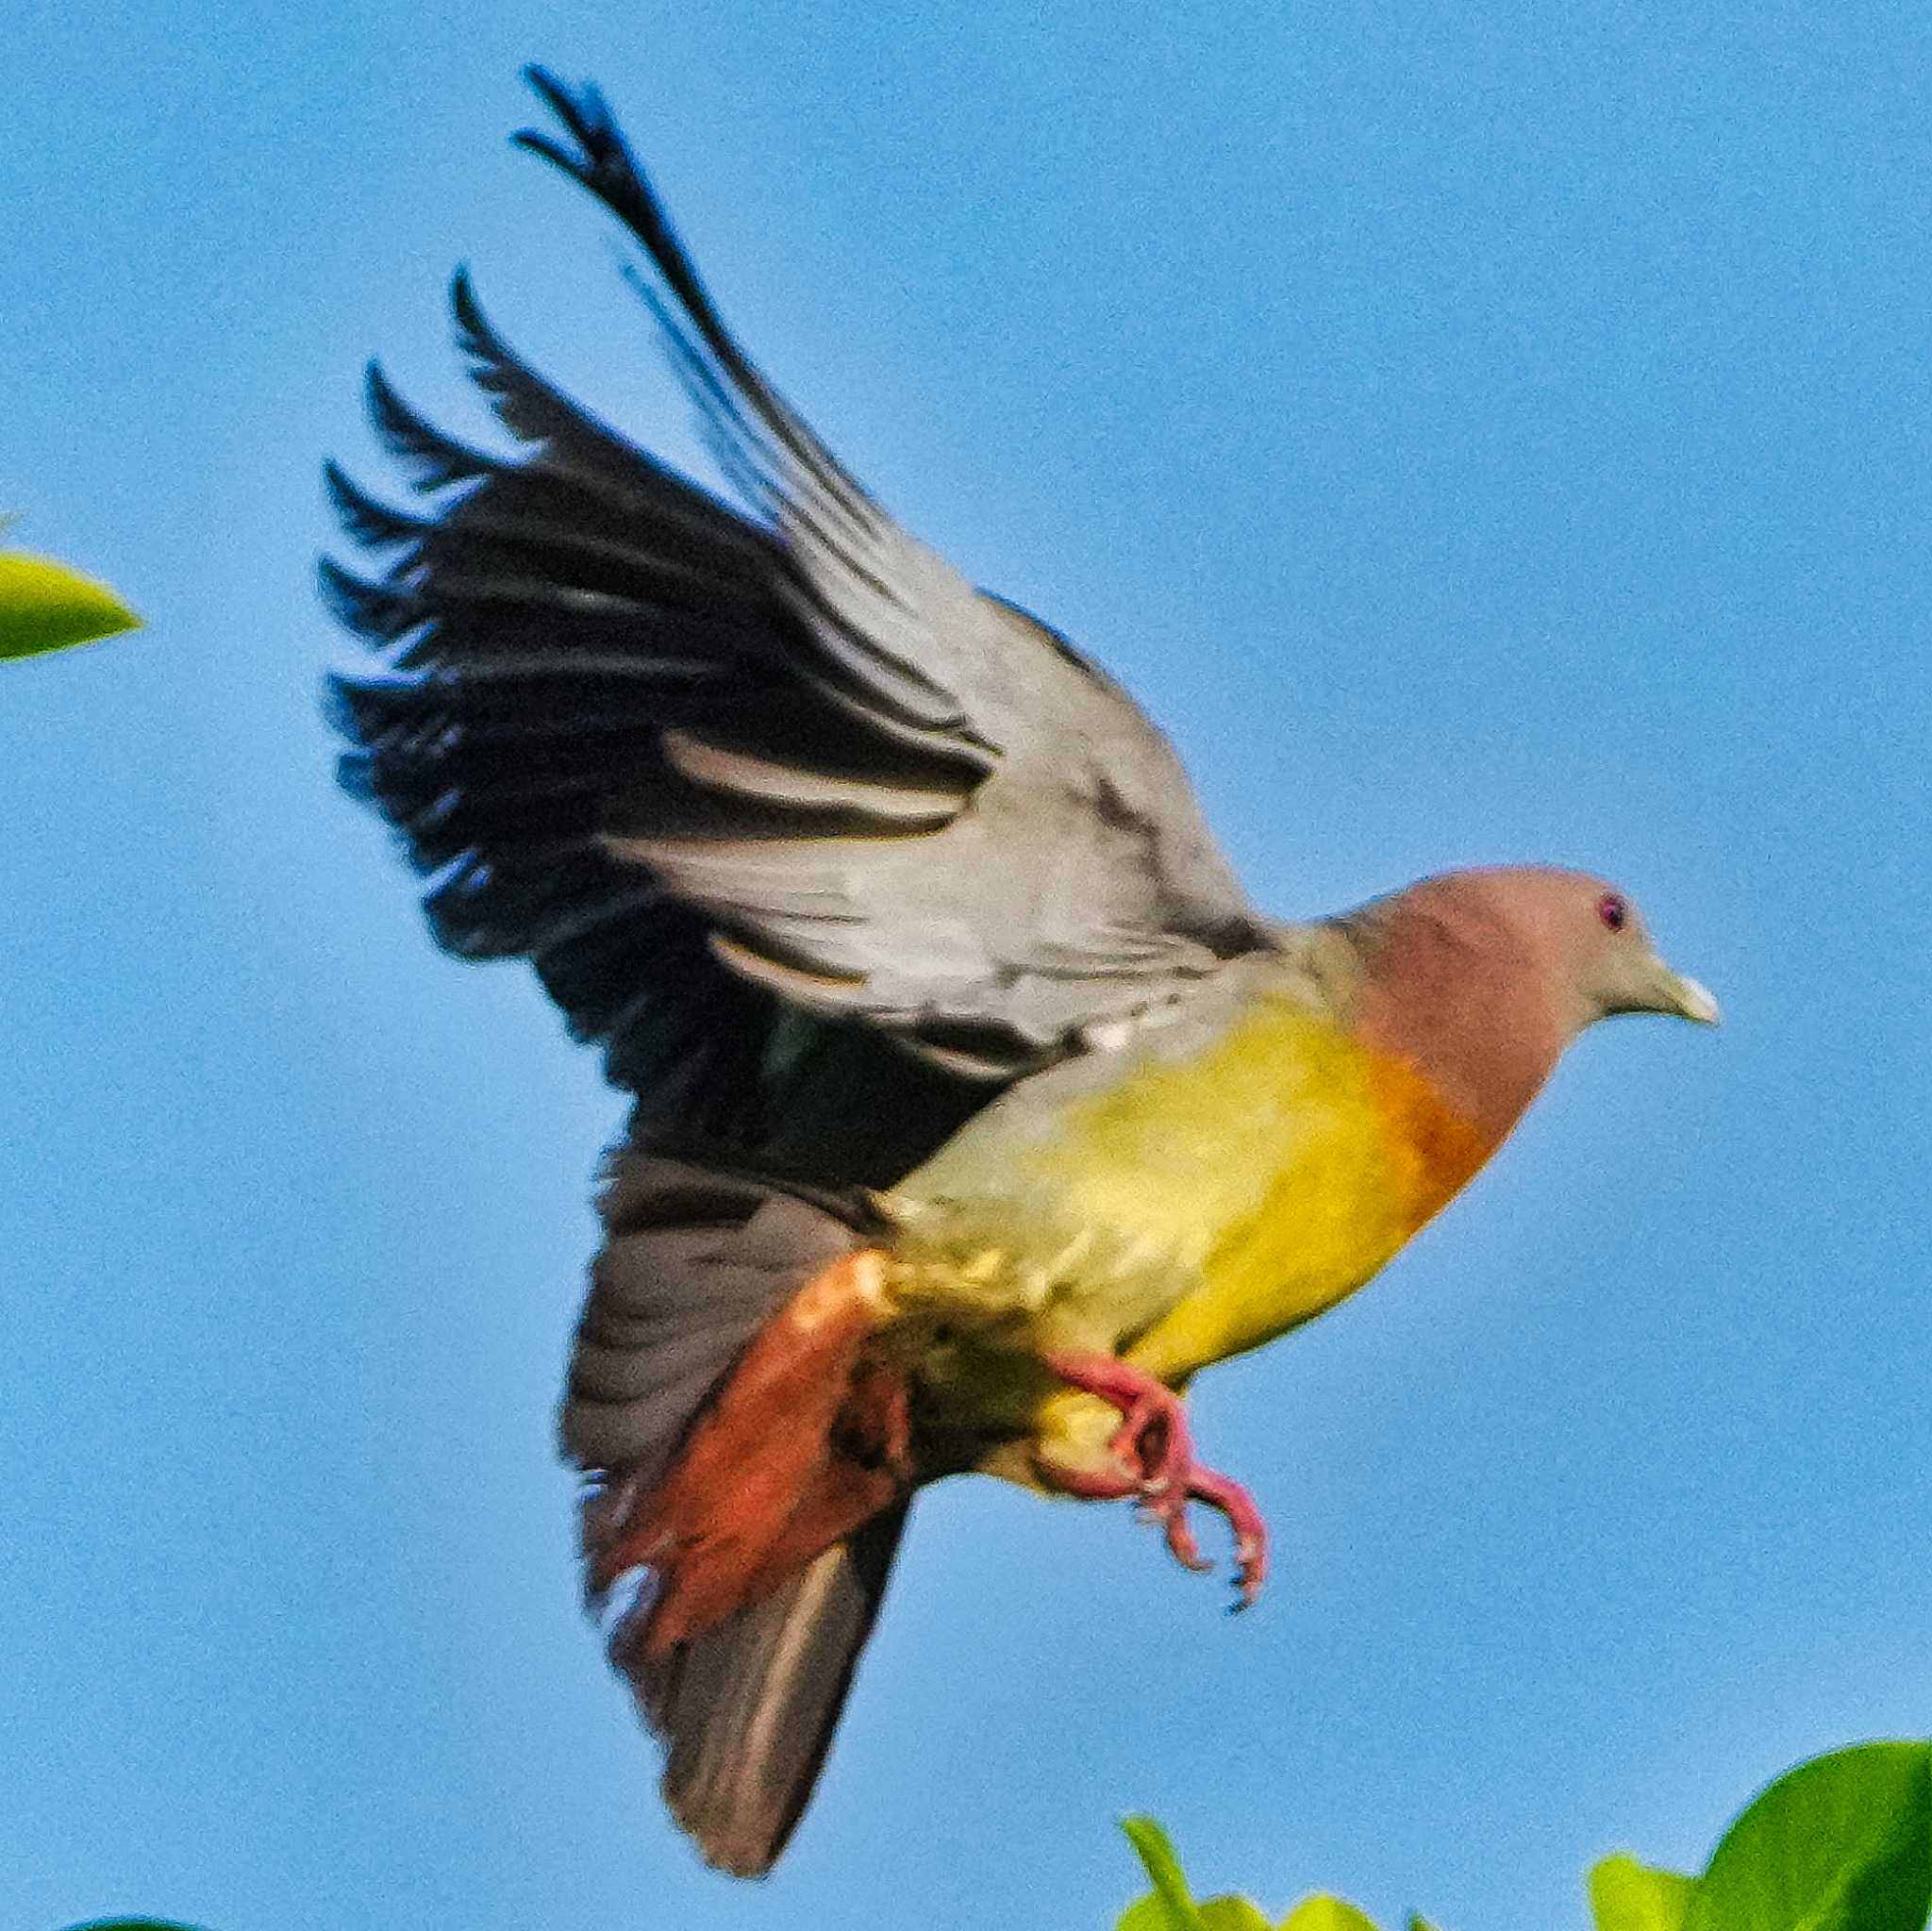 Pink-necked Green Pigeon